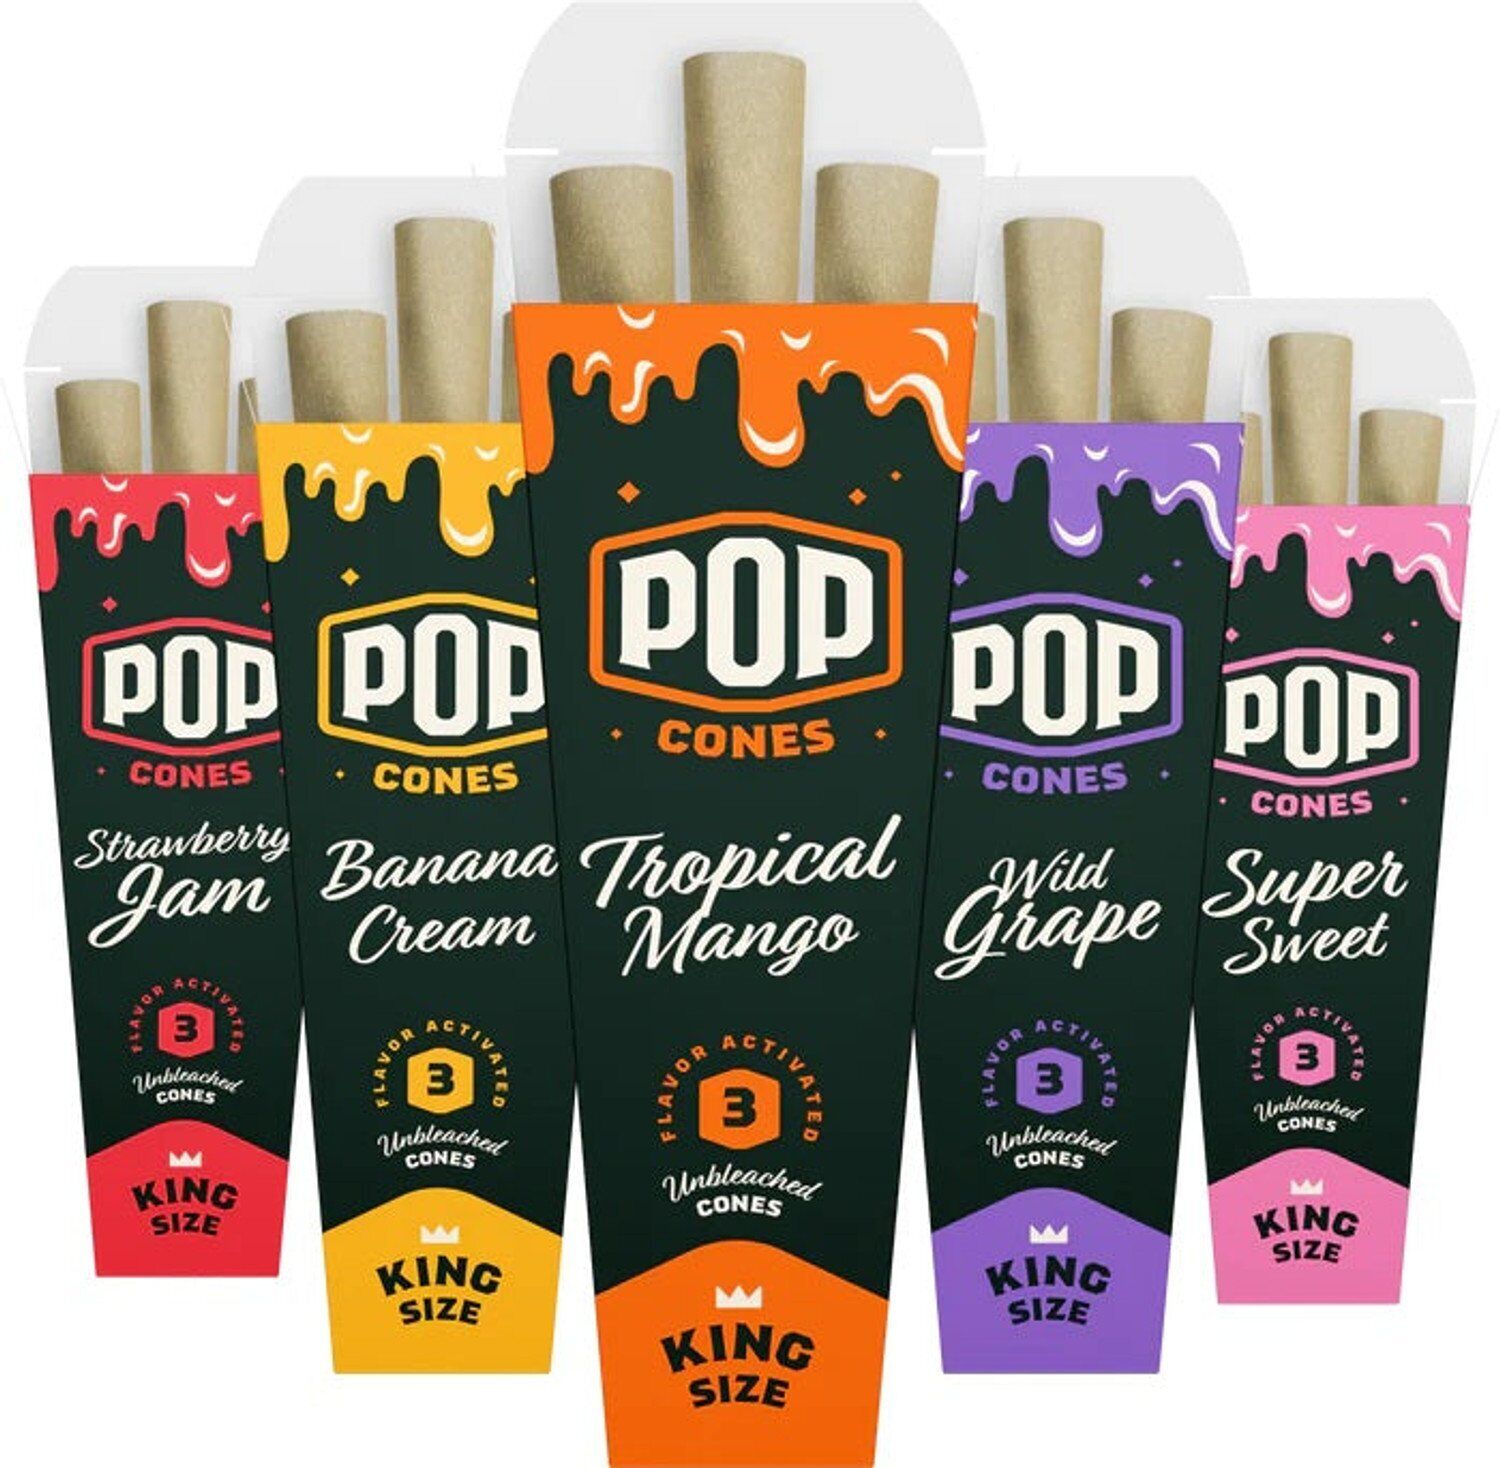 5 Pack Pop Cones Variety Packs Unbleached - King Size